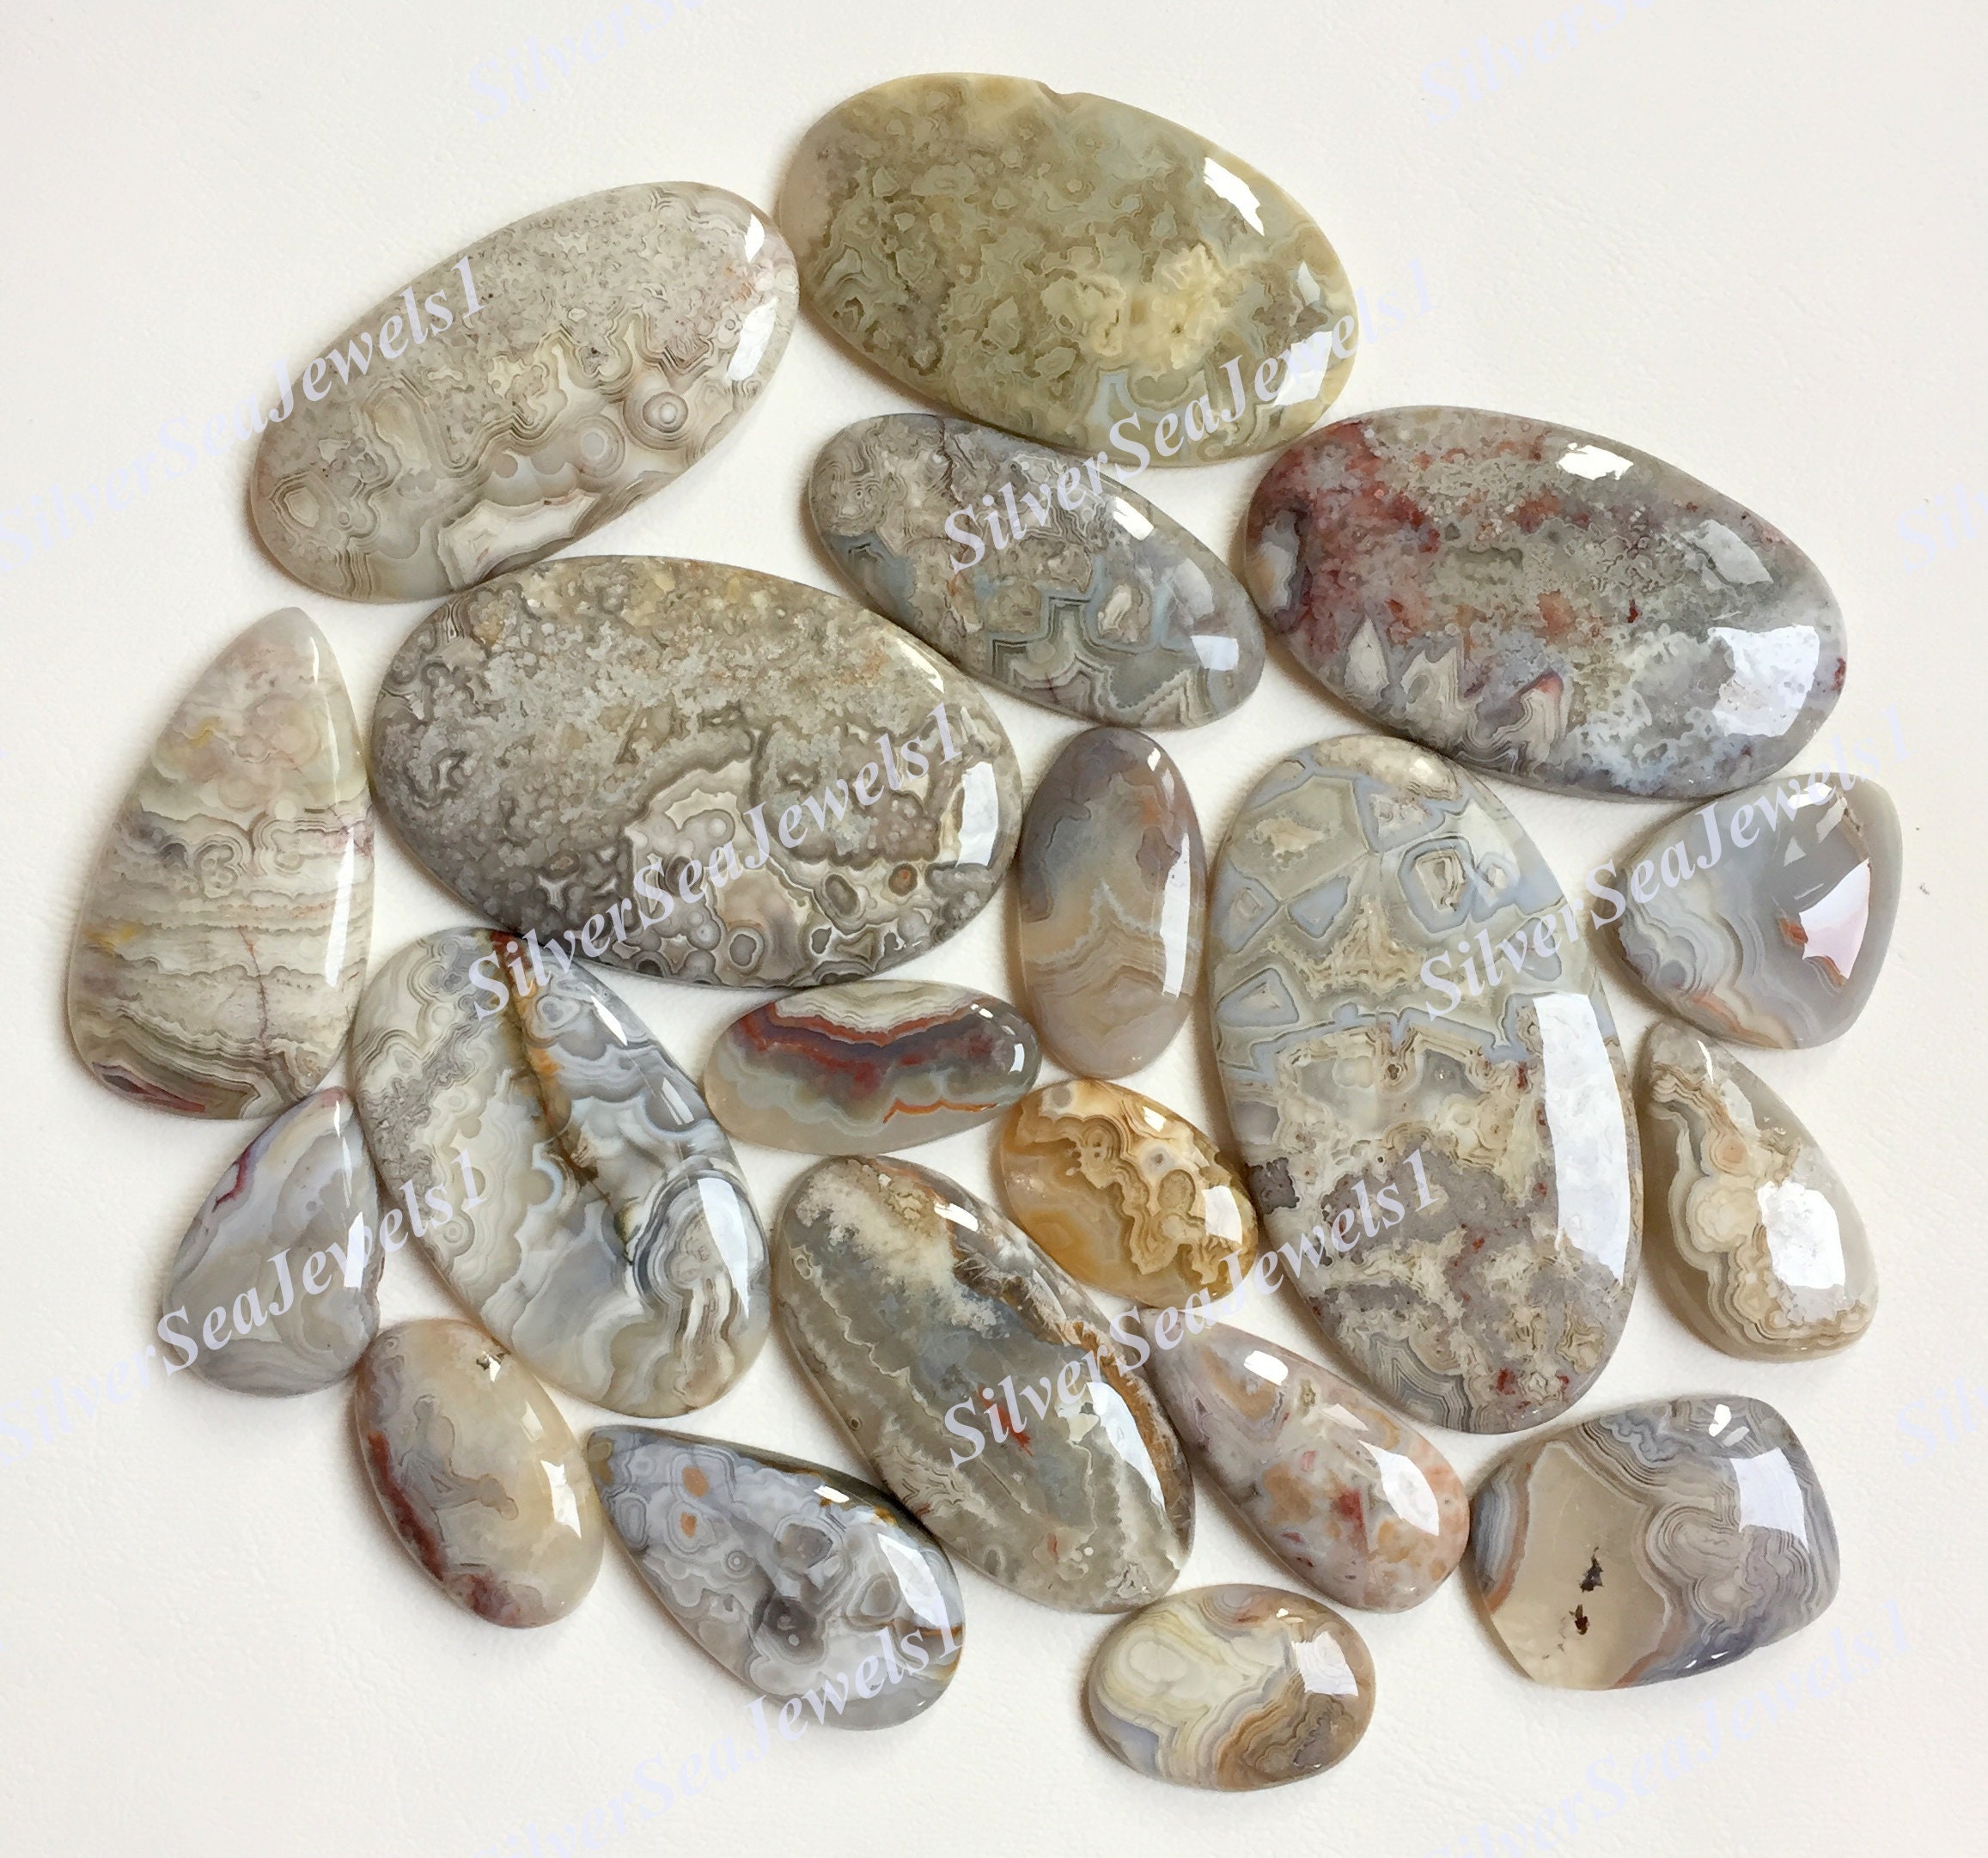 Amazing Quality Crazy Lace Agate Cabochon Wholesale Lot Mix Shape and Size Crazy Lace Agate Cabochon for Jewellery